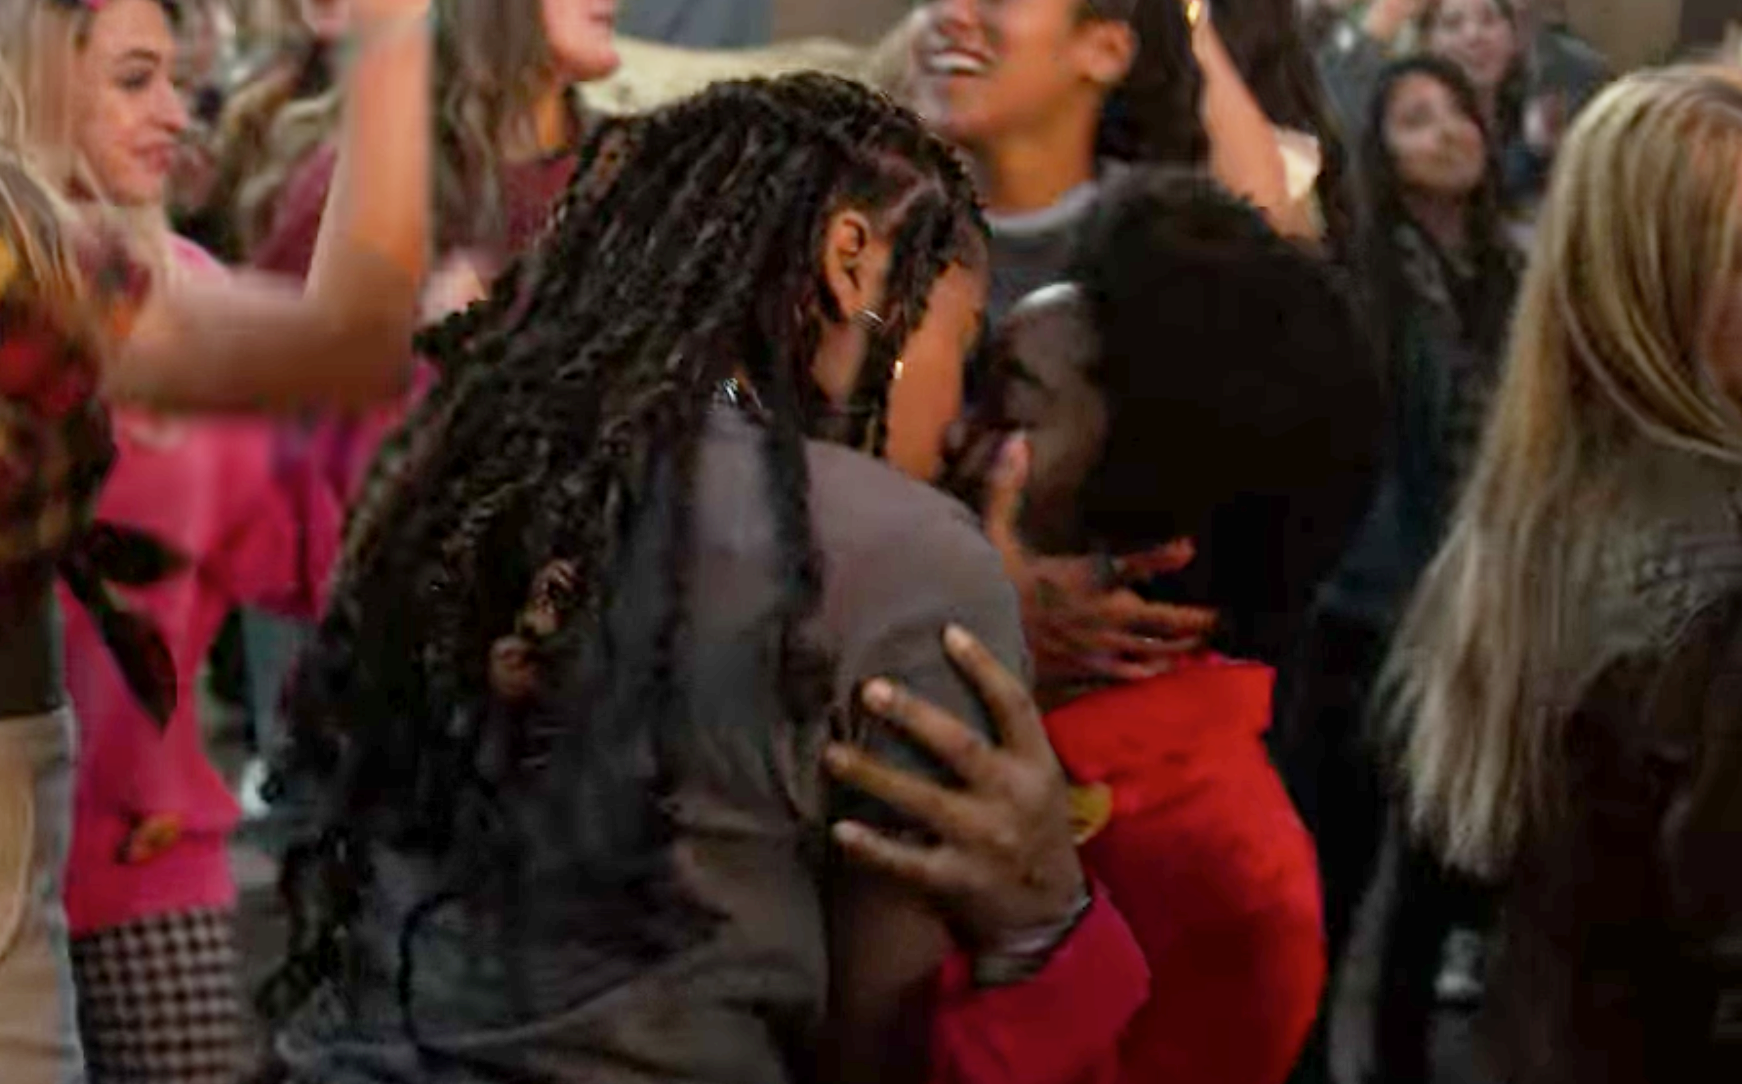 Lucy and Amaya kissing at a concert in the crowd